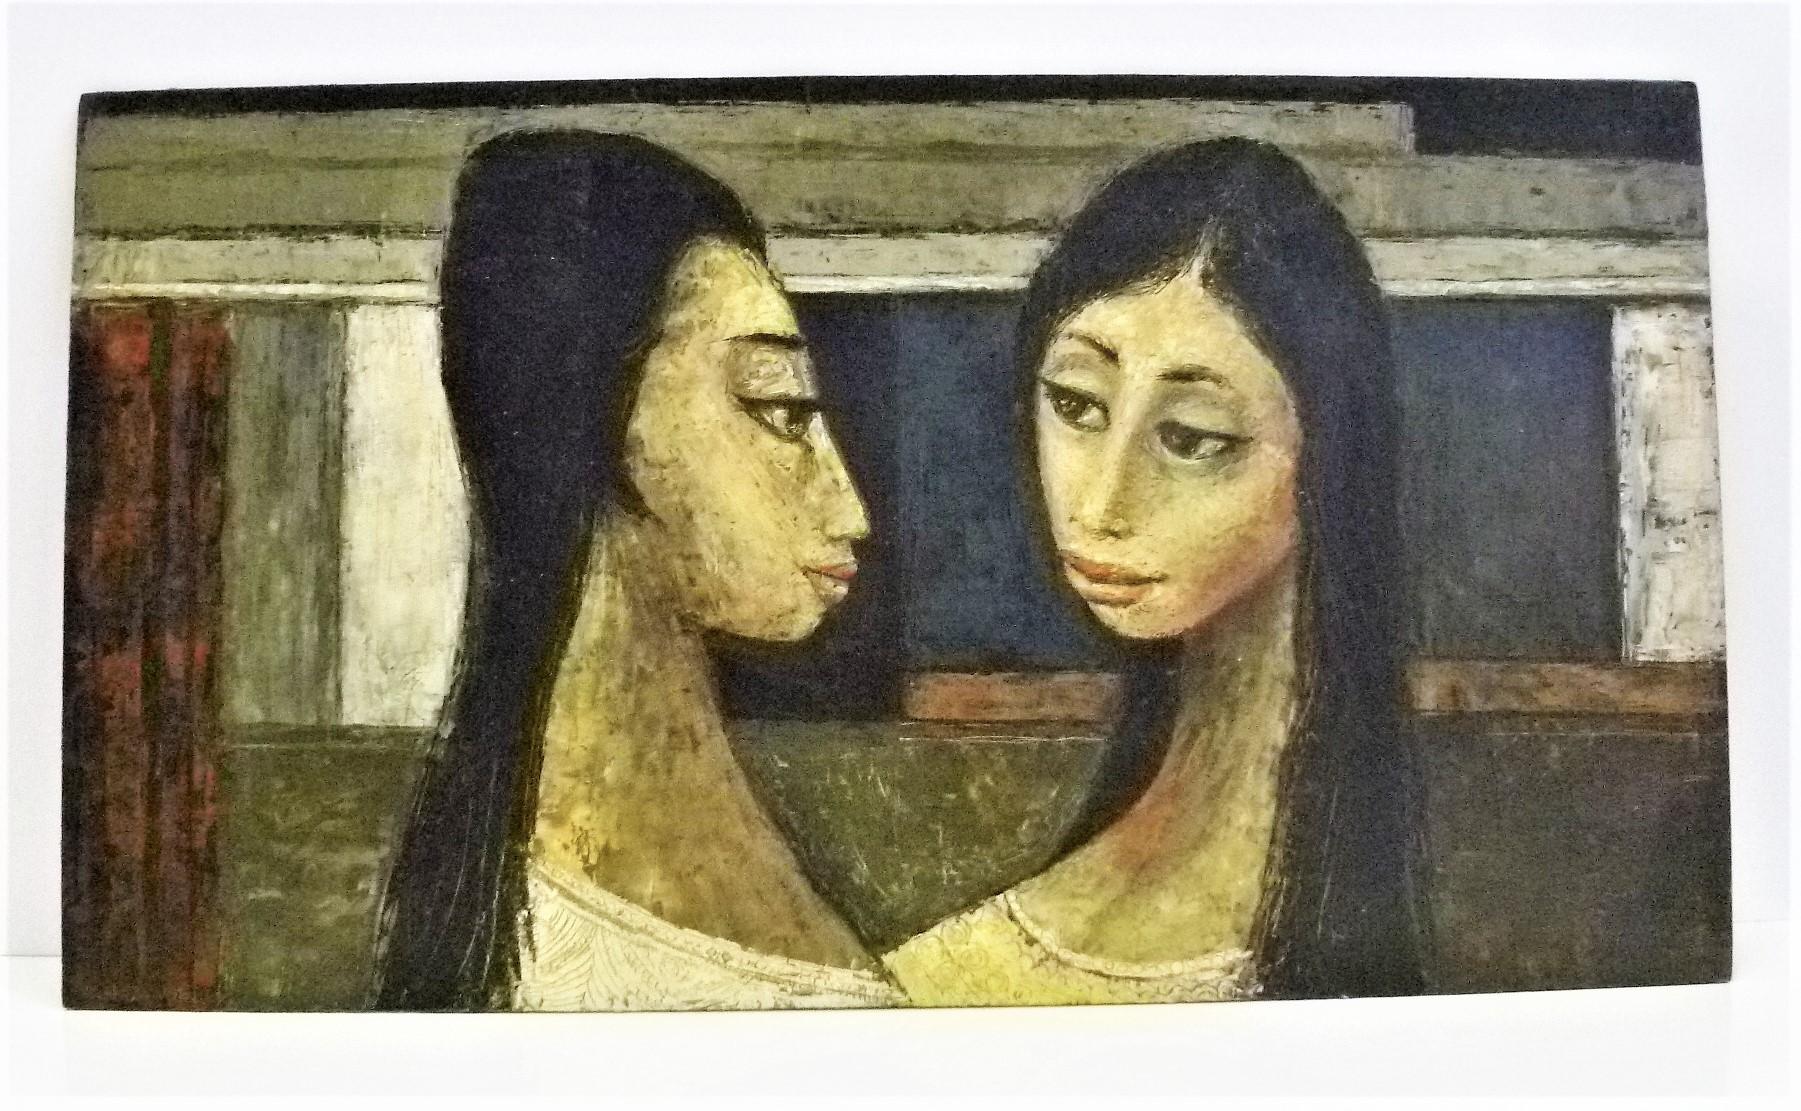 Vintage midcentury framed oil painting by Bert Pumphrey (1916-2000) of two women, Dos Damas. An oil on board (masonite), it is in his distinctive style of two long necked exotic Mexican women, a country he moved to either in the late 40s or early